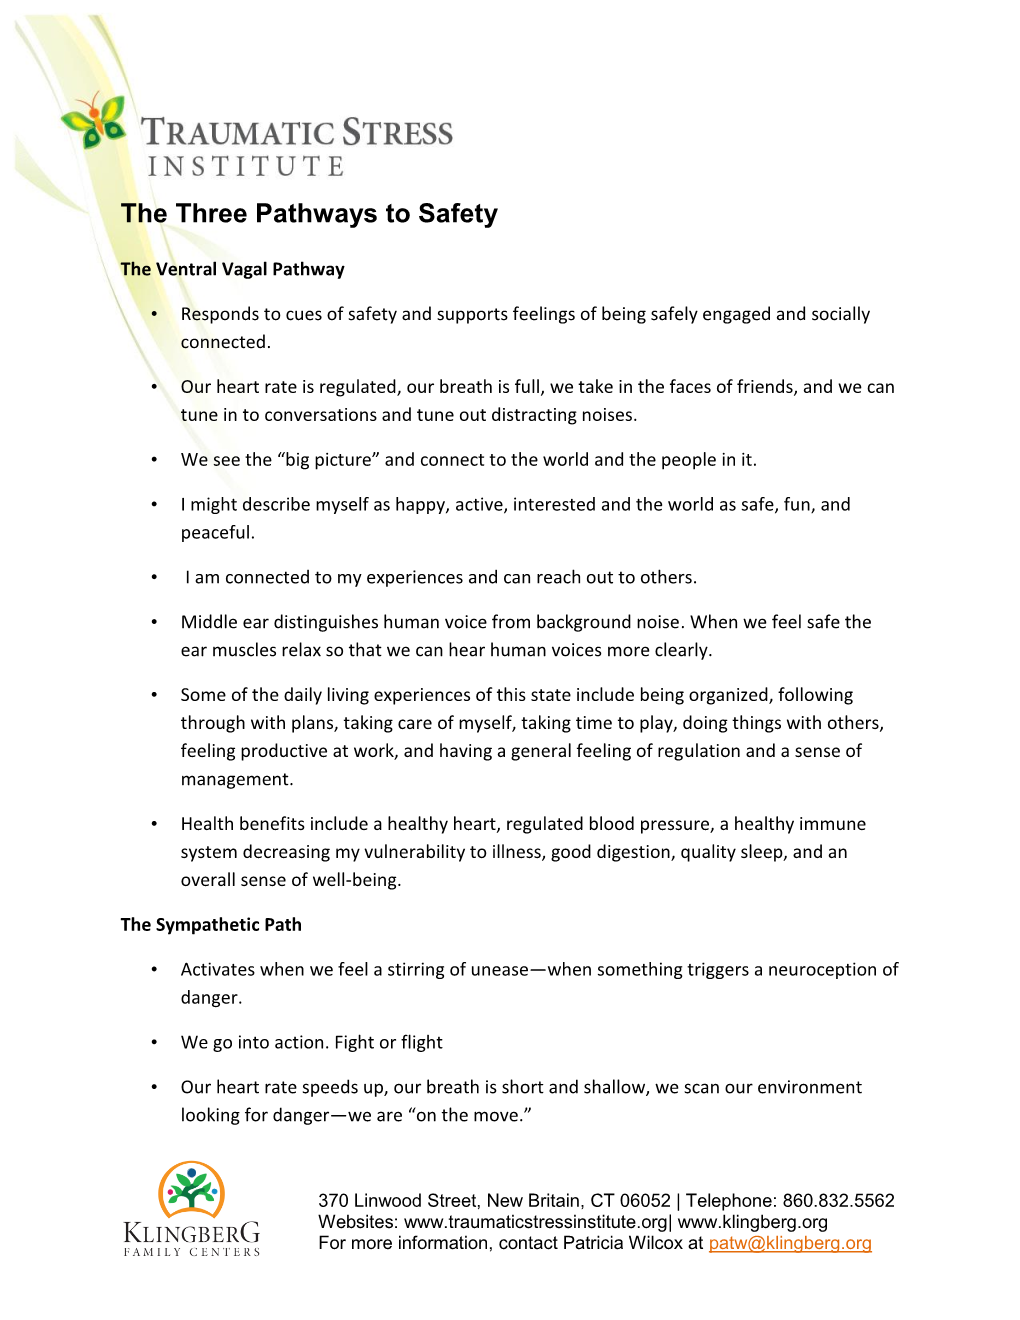 The Three Pathways to Safety